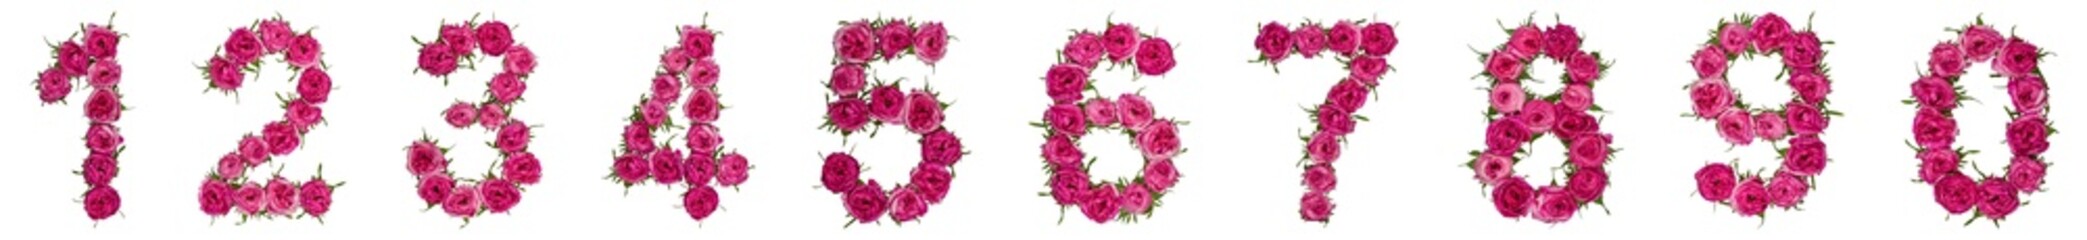 Set of arabic numbers from natural red flowers of roses, isolated on white background - 482296510